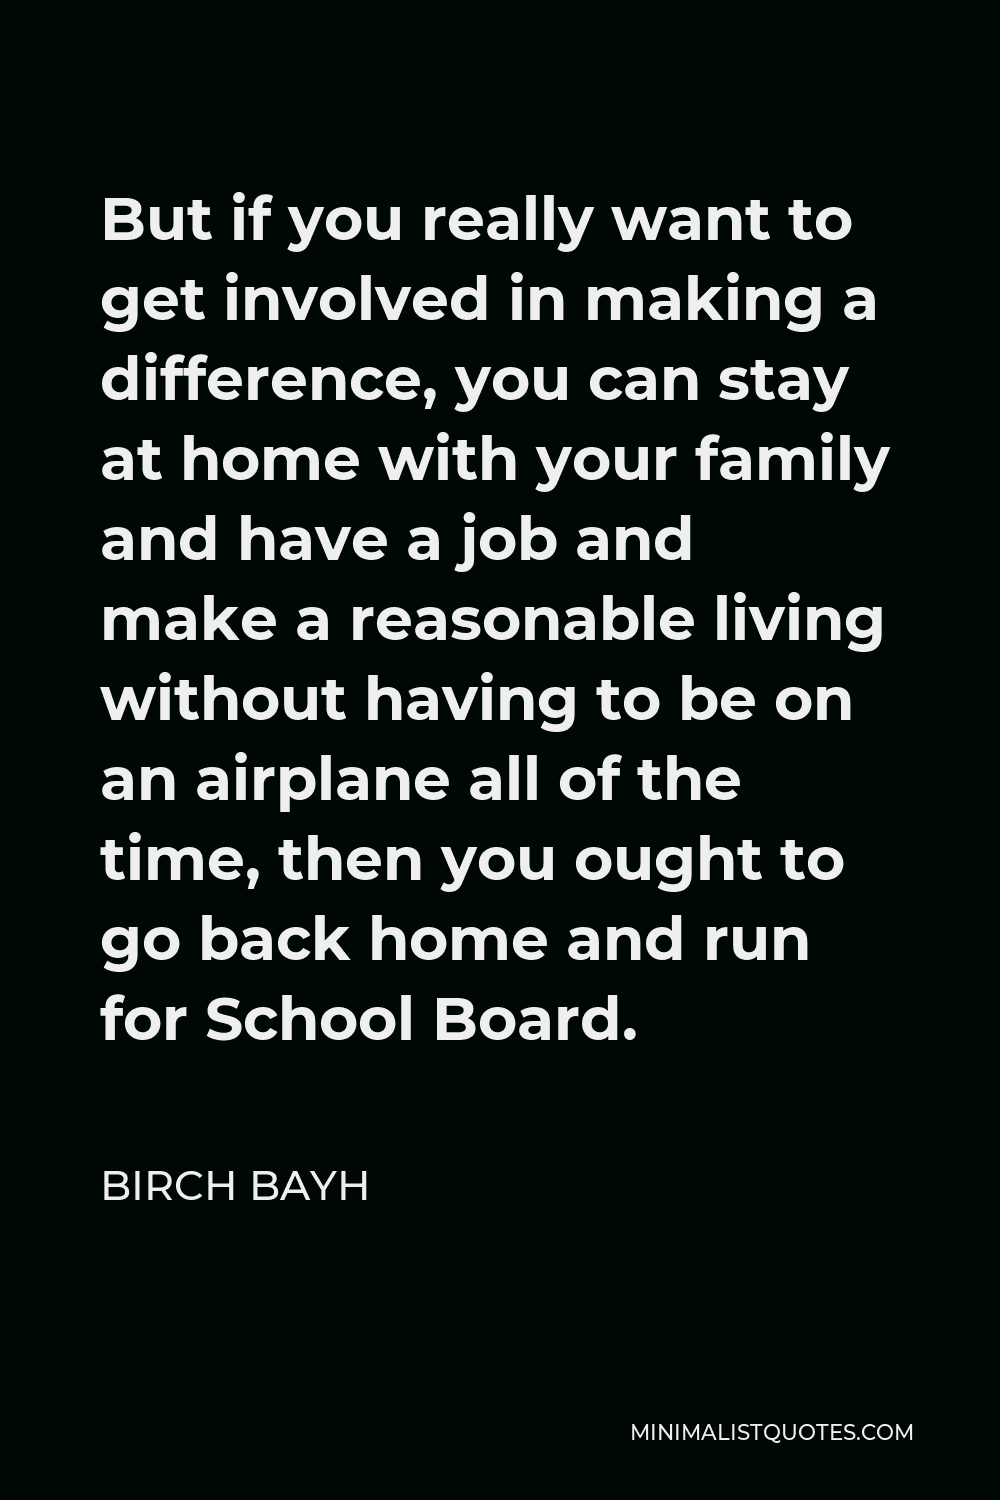 Birch Bayh Quote - But if you really want to get involved in making a difference, you can stay at home with your family and have a job and make a reasonable living without having to be on an airplane all of the time, then you ought to go back home and run for School Board.